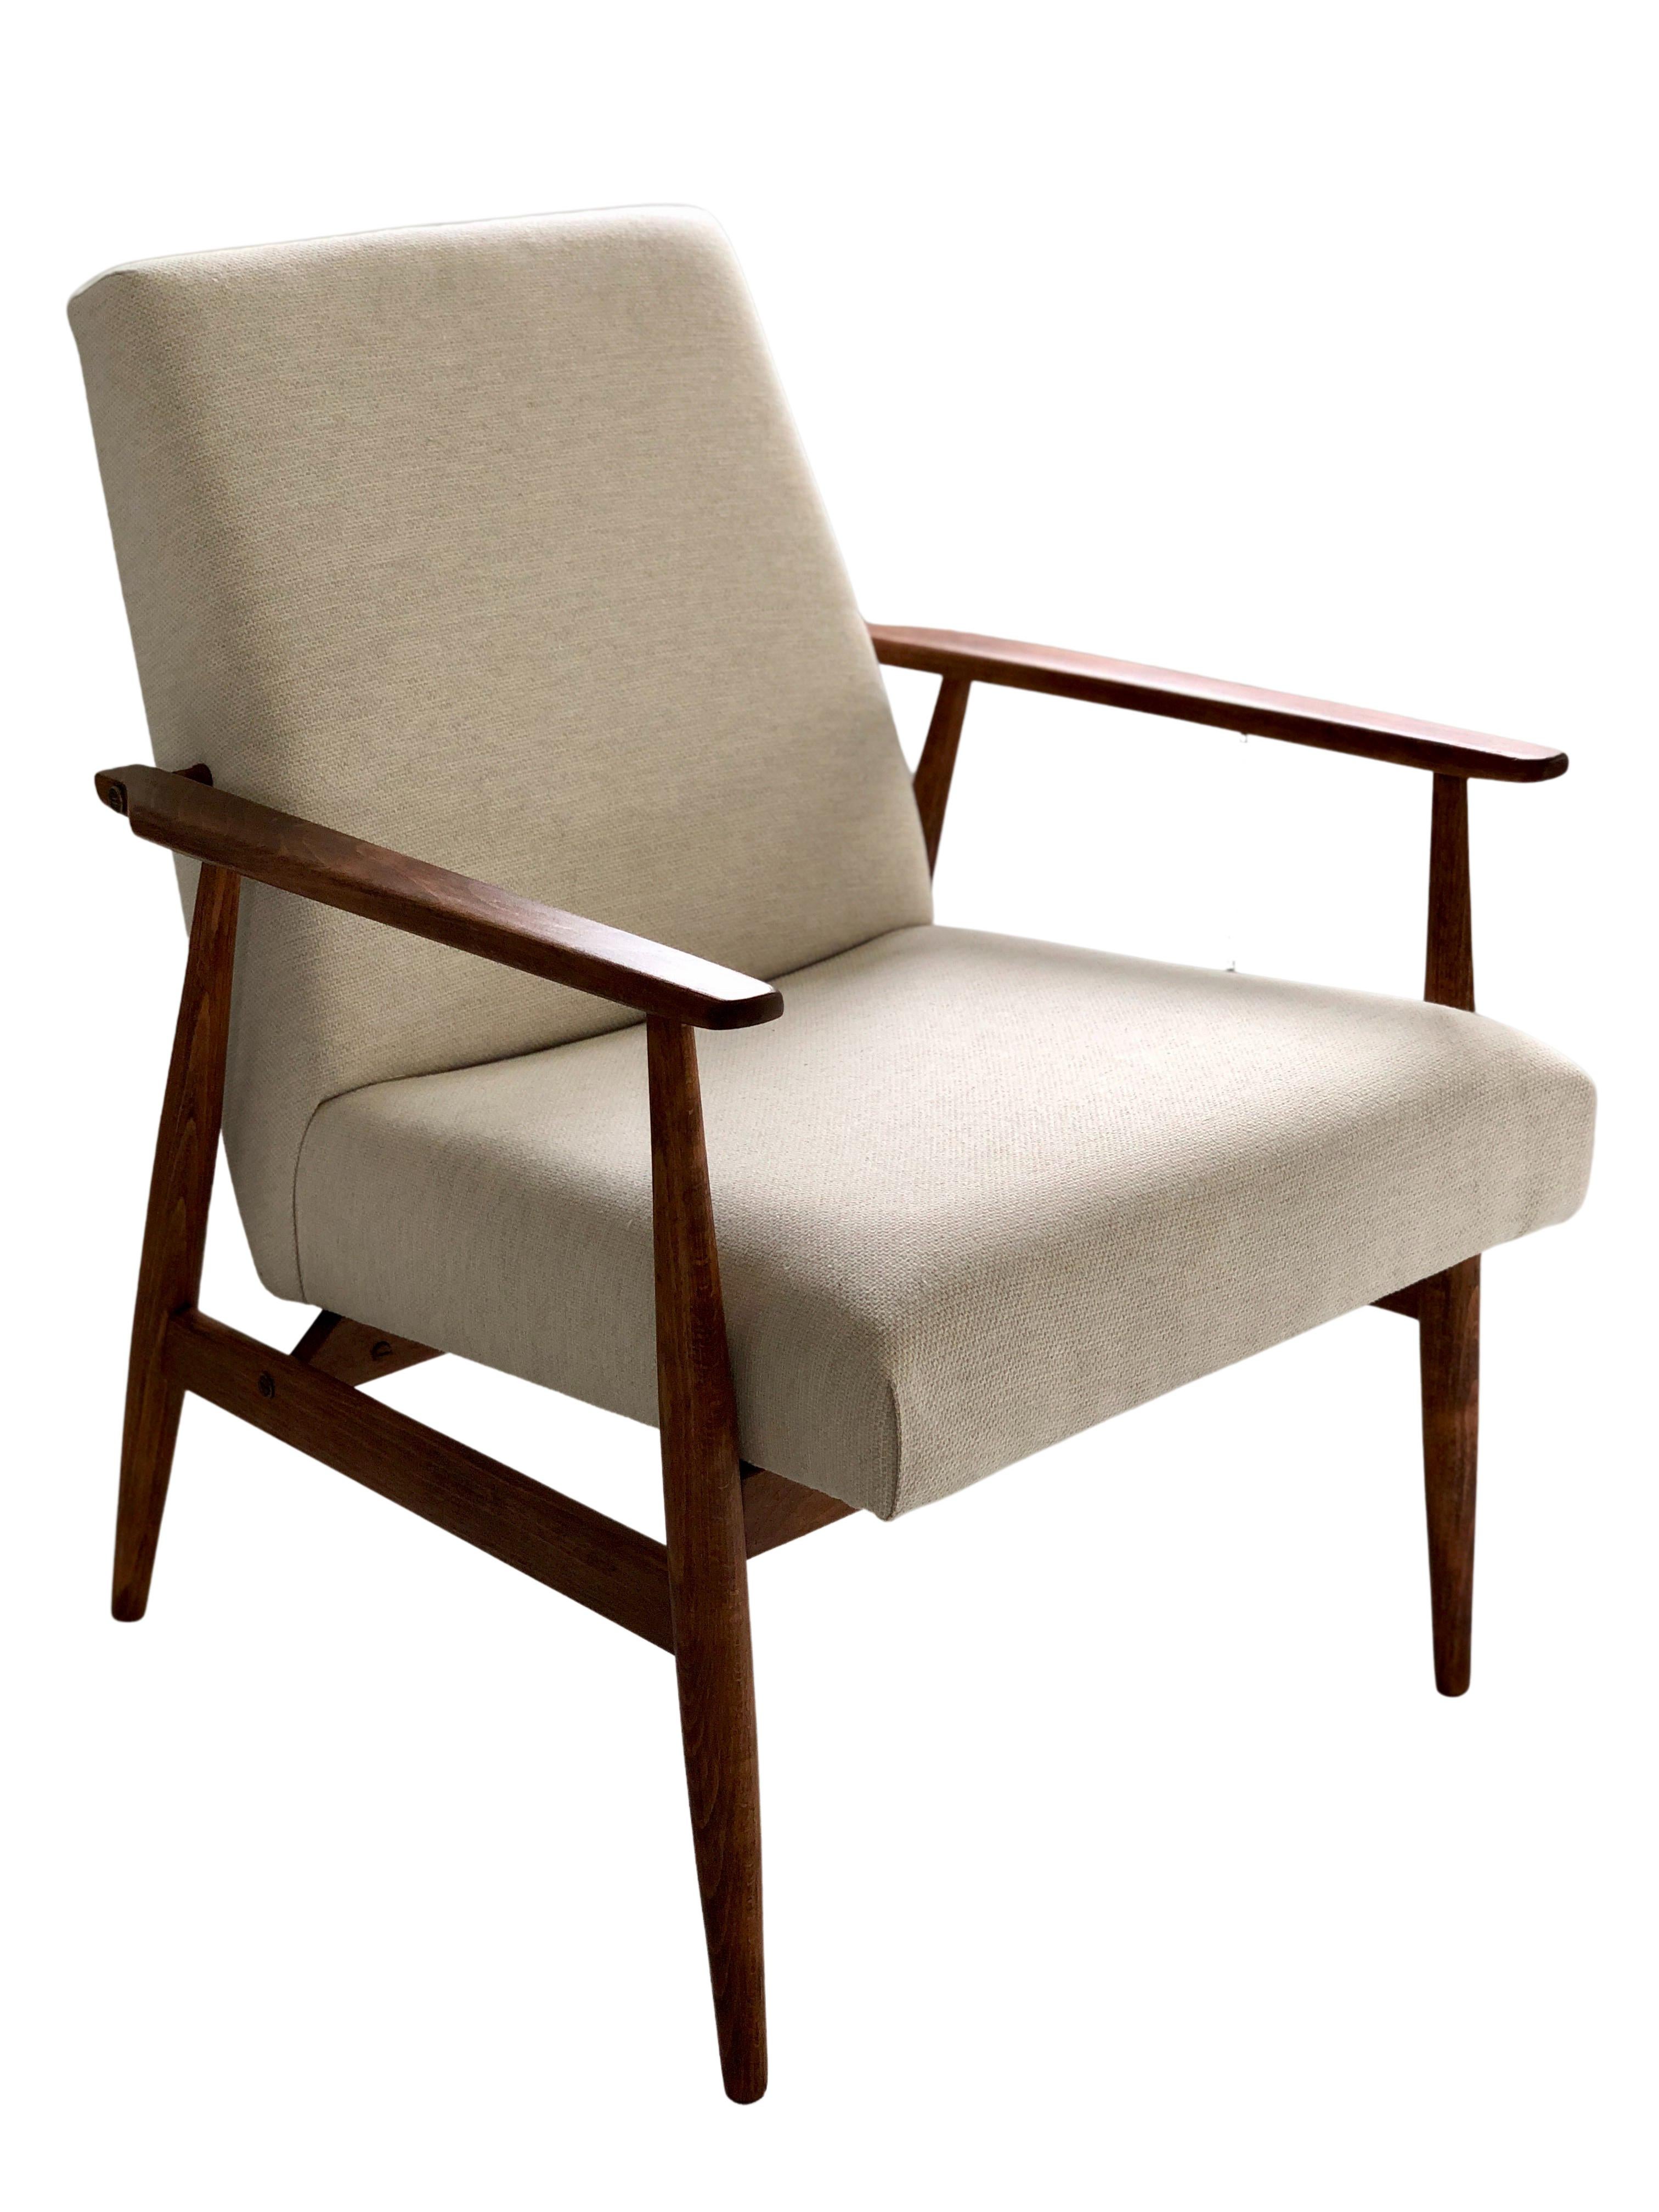 Cotton Midcentury Set of Two Beige Armchairs by Henryk Lis, Europe, 1960s For Sale